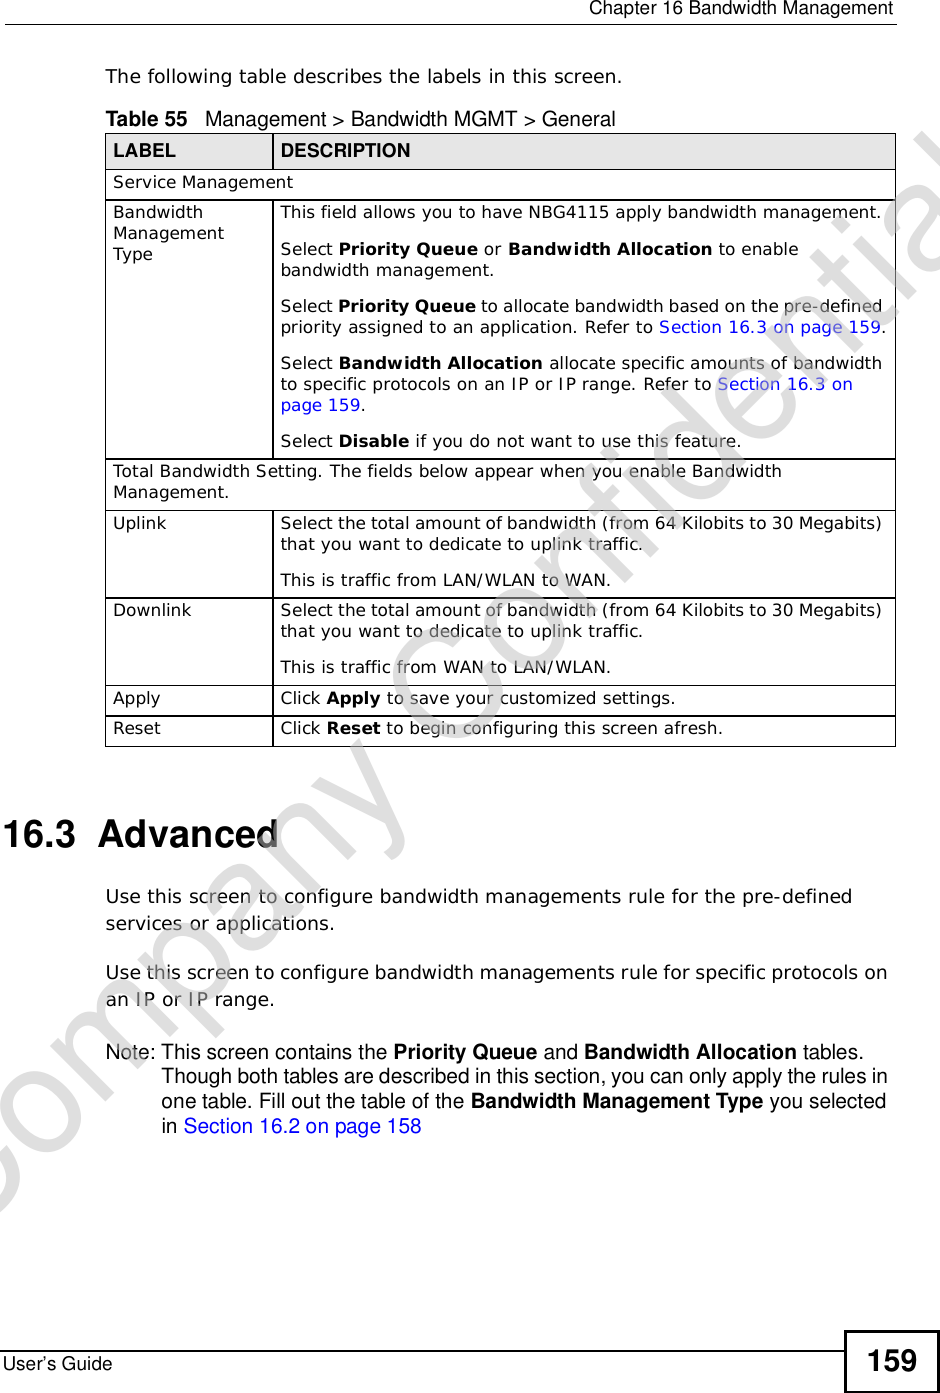  Chapter 16Bandwidth ManagementUser’s Guide 159The following table describes the labels in this screen.16.3  Advanced Use this screen to configure bandwidth managements rule for the pre-defined services or applications. Use this screen to configure bandwidth managements rule for specific protocols on an IP or IP range. Note: This screen contains the Priority Queue and Bandwidth Allocation tables. Though both tables are described in this section, you can only apply the rules in one table. Fill out the table of the Bandwidth Management Type you selected in Section 16.2 on page 158Table 55   Management &gt; Bandwidth MGMT &gt; GeneralLABEL DESCRIPTIONService ManagementBandwidth ManagementTypeThis field allows you to have NBG4115 apply bandwidth management. Select Priority Queue or Bandwidth Allocation to enable bandwidth management.Select Priority Queue to allocate bandwidth based on the pre-defined priority assigned to an application. Refer to Section 16.3 on page 159.Select Bandwidth Allocation allocate specific amounts of bandwidth to specific protocols on an IP or IP range. Refer to Section 16.3 on page 159.Select Disable if you do not want to use this feature.Total Bandwidth Setting. The fields below appear when you enable Bandwidth Management.Uplink Select the total amount of bandwidth (from 64 Kilobits to 30 Megabits) that you want to dedicate to uplink traffic. This is traffic from LAN/WLAN to WAN.Downlink Select the total amount of bandwidth (from 64 Kilobits to 30 Megabits) that you want to dedicate to uplink traffic. This is traffic from WAN to LAN/WLAN.Apply Click Apply to save your customized settings.Reset Click Reset to begin configuring this screen afresh.Company Confidential